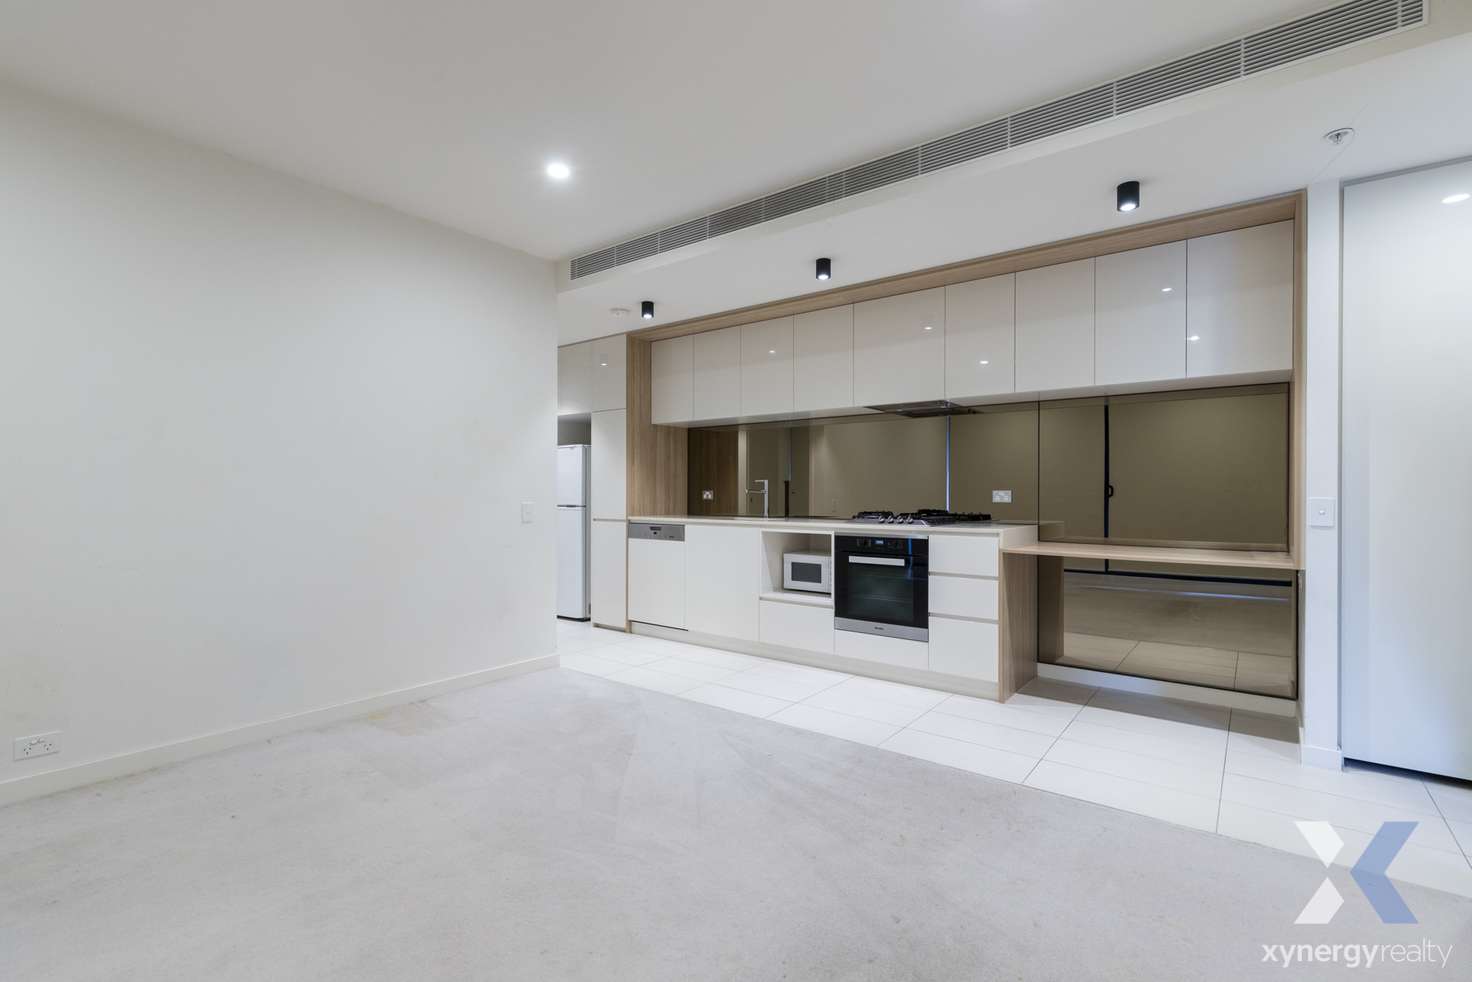 Main view of Homely apartment listing, 615/3 Yarra Street, South Yarra VIC 3141